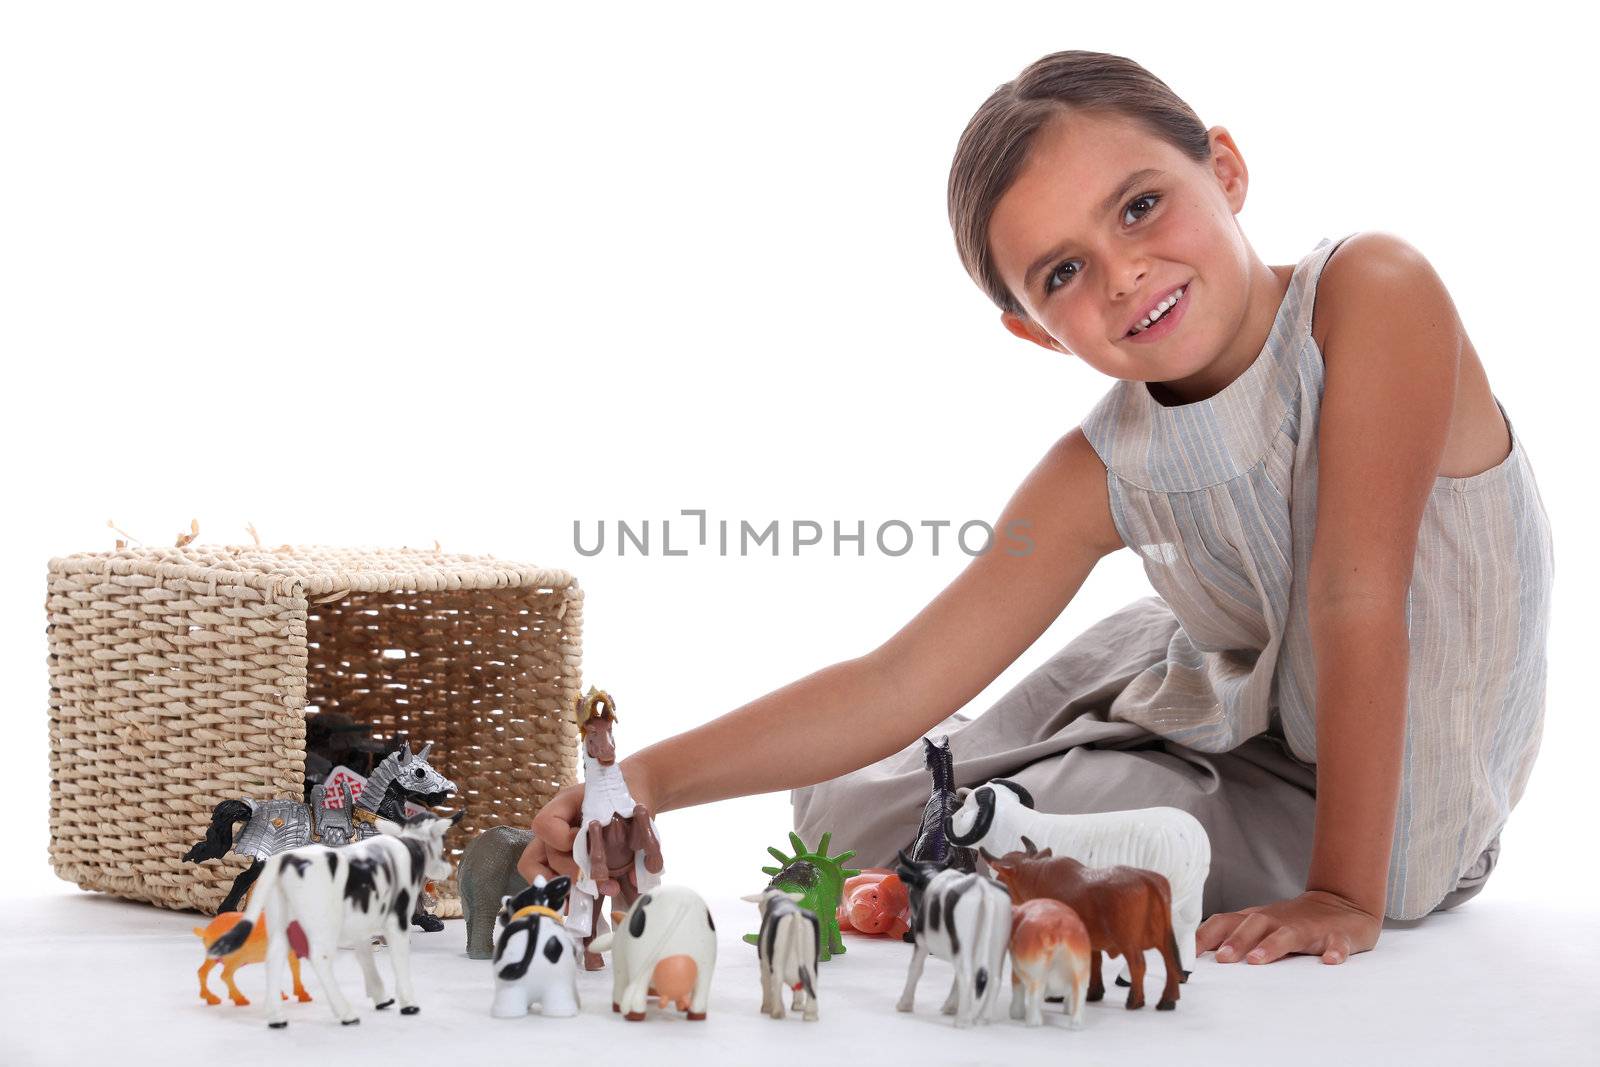 Little girl playing with toy animals by phovoir